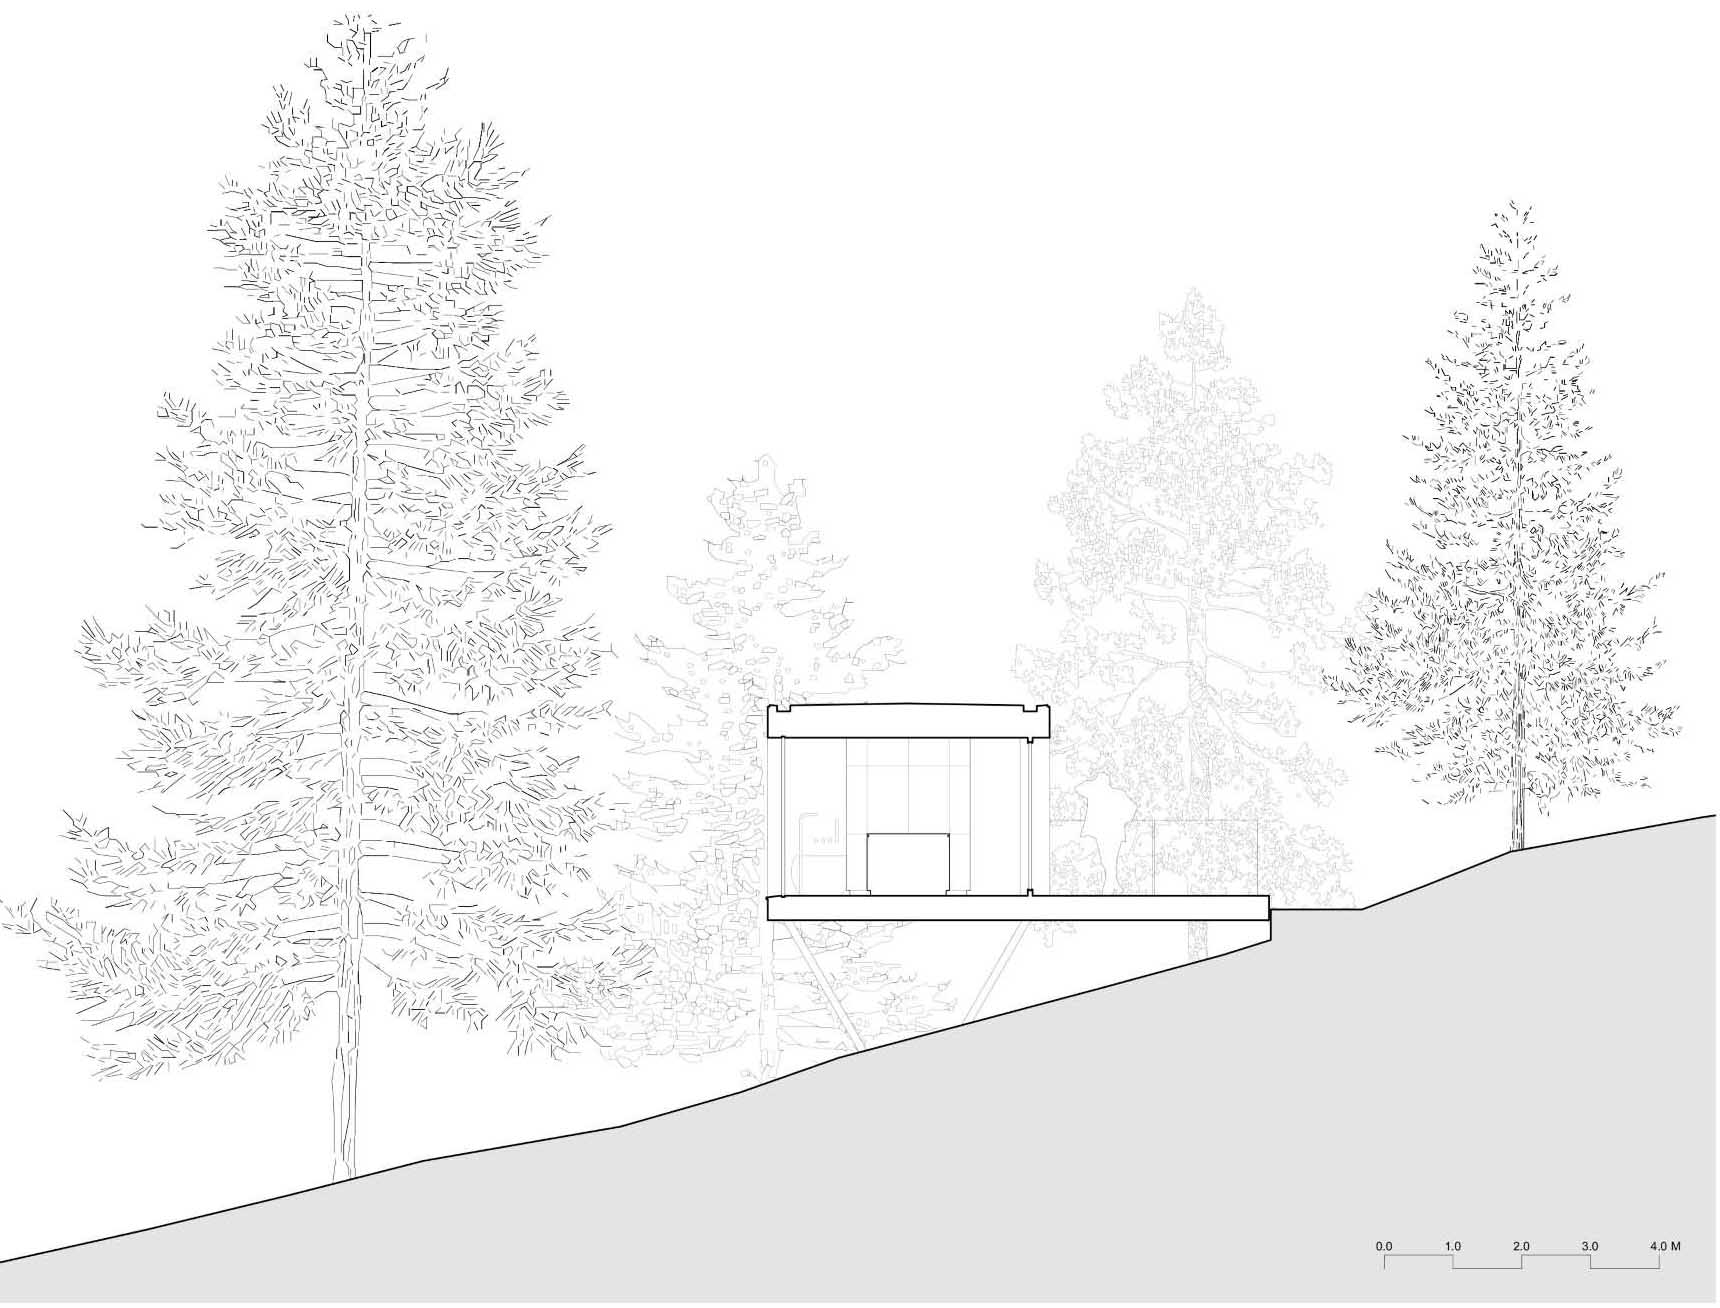 A diagram for a small home nestled within the trees.